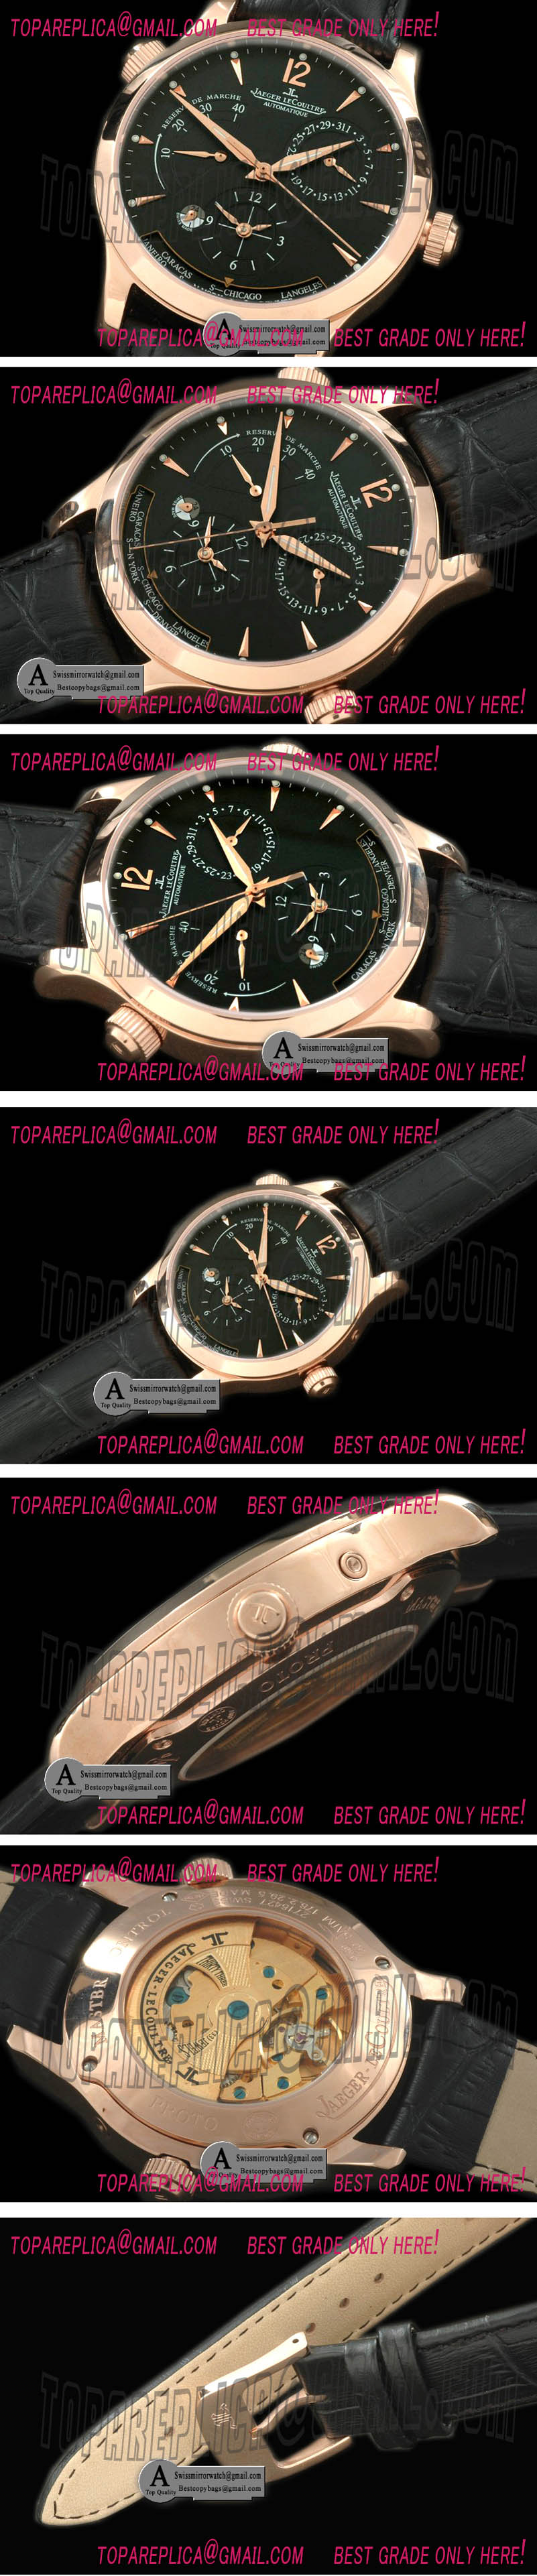 Jaeger-LeCoultre Master Reserve/Duo Time Rose Gold/Leather Black Asian 23J Replica Watches